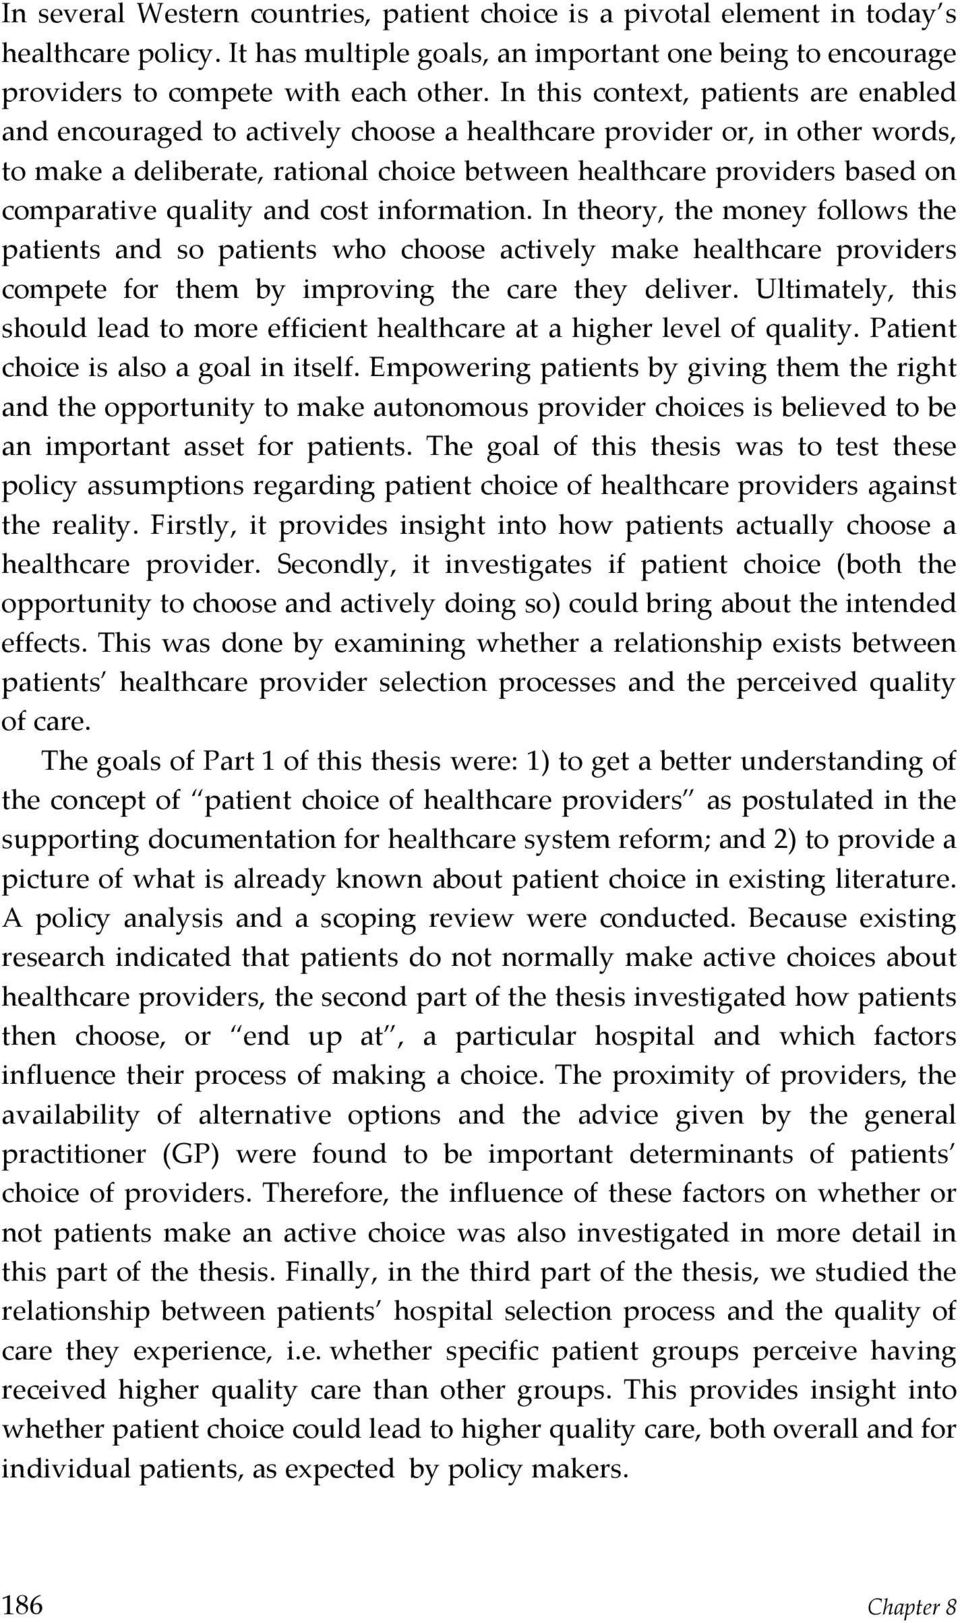 comparativequalityandcostinformation.intheory,themoneyfollowsthe patients and so patients who choose actively make healthcare providers compete for them by improving the care they deliver.